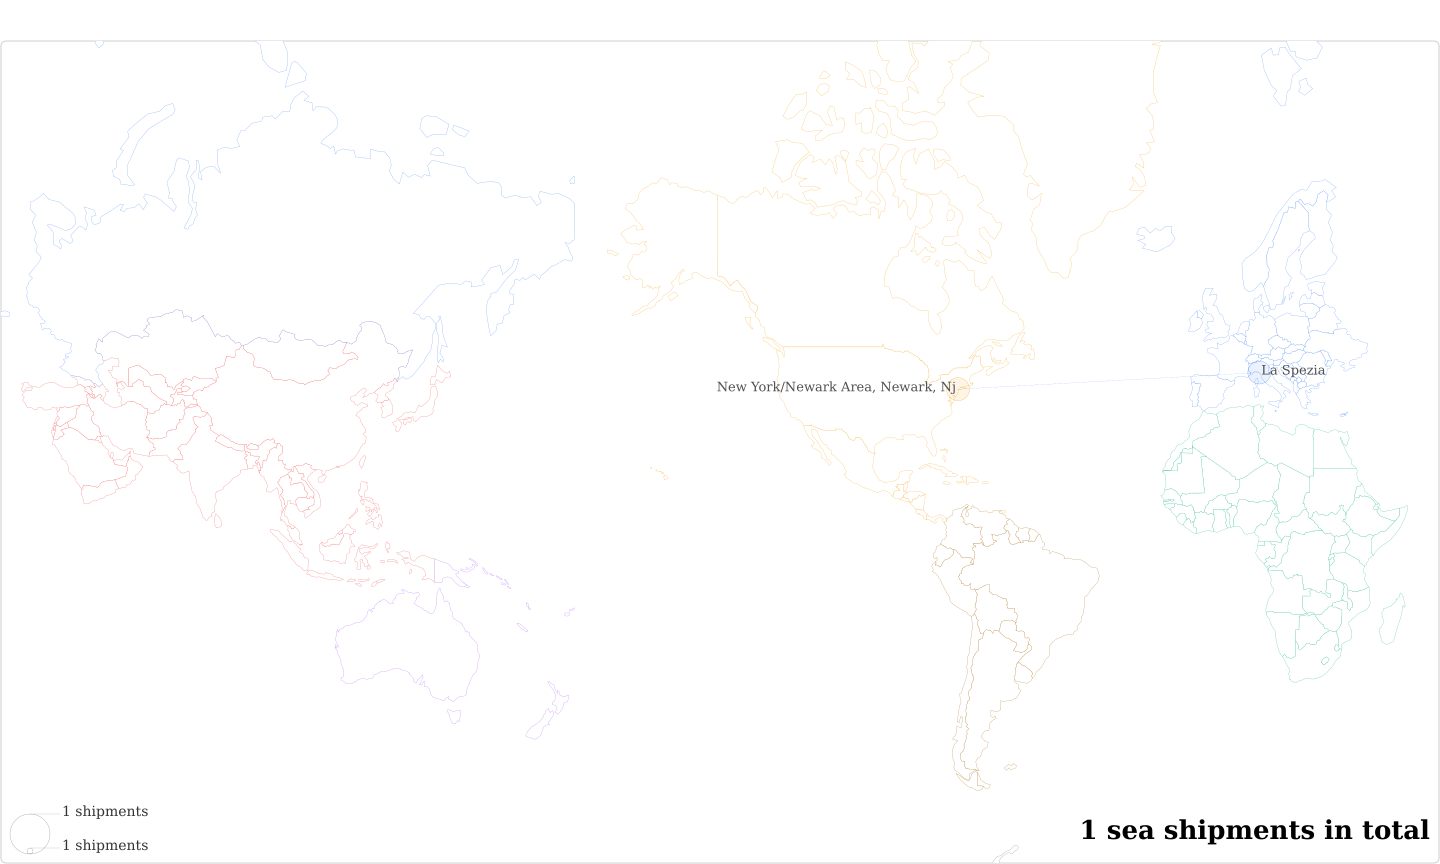 Caffe Bonomi S P A's Imports Per Country Map